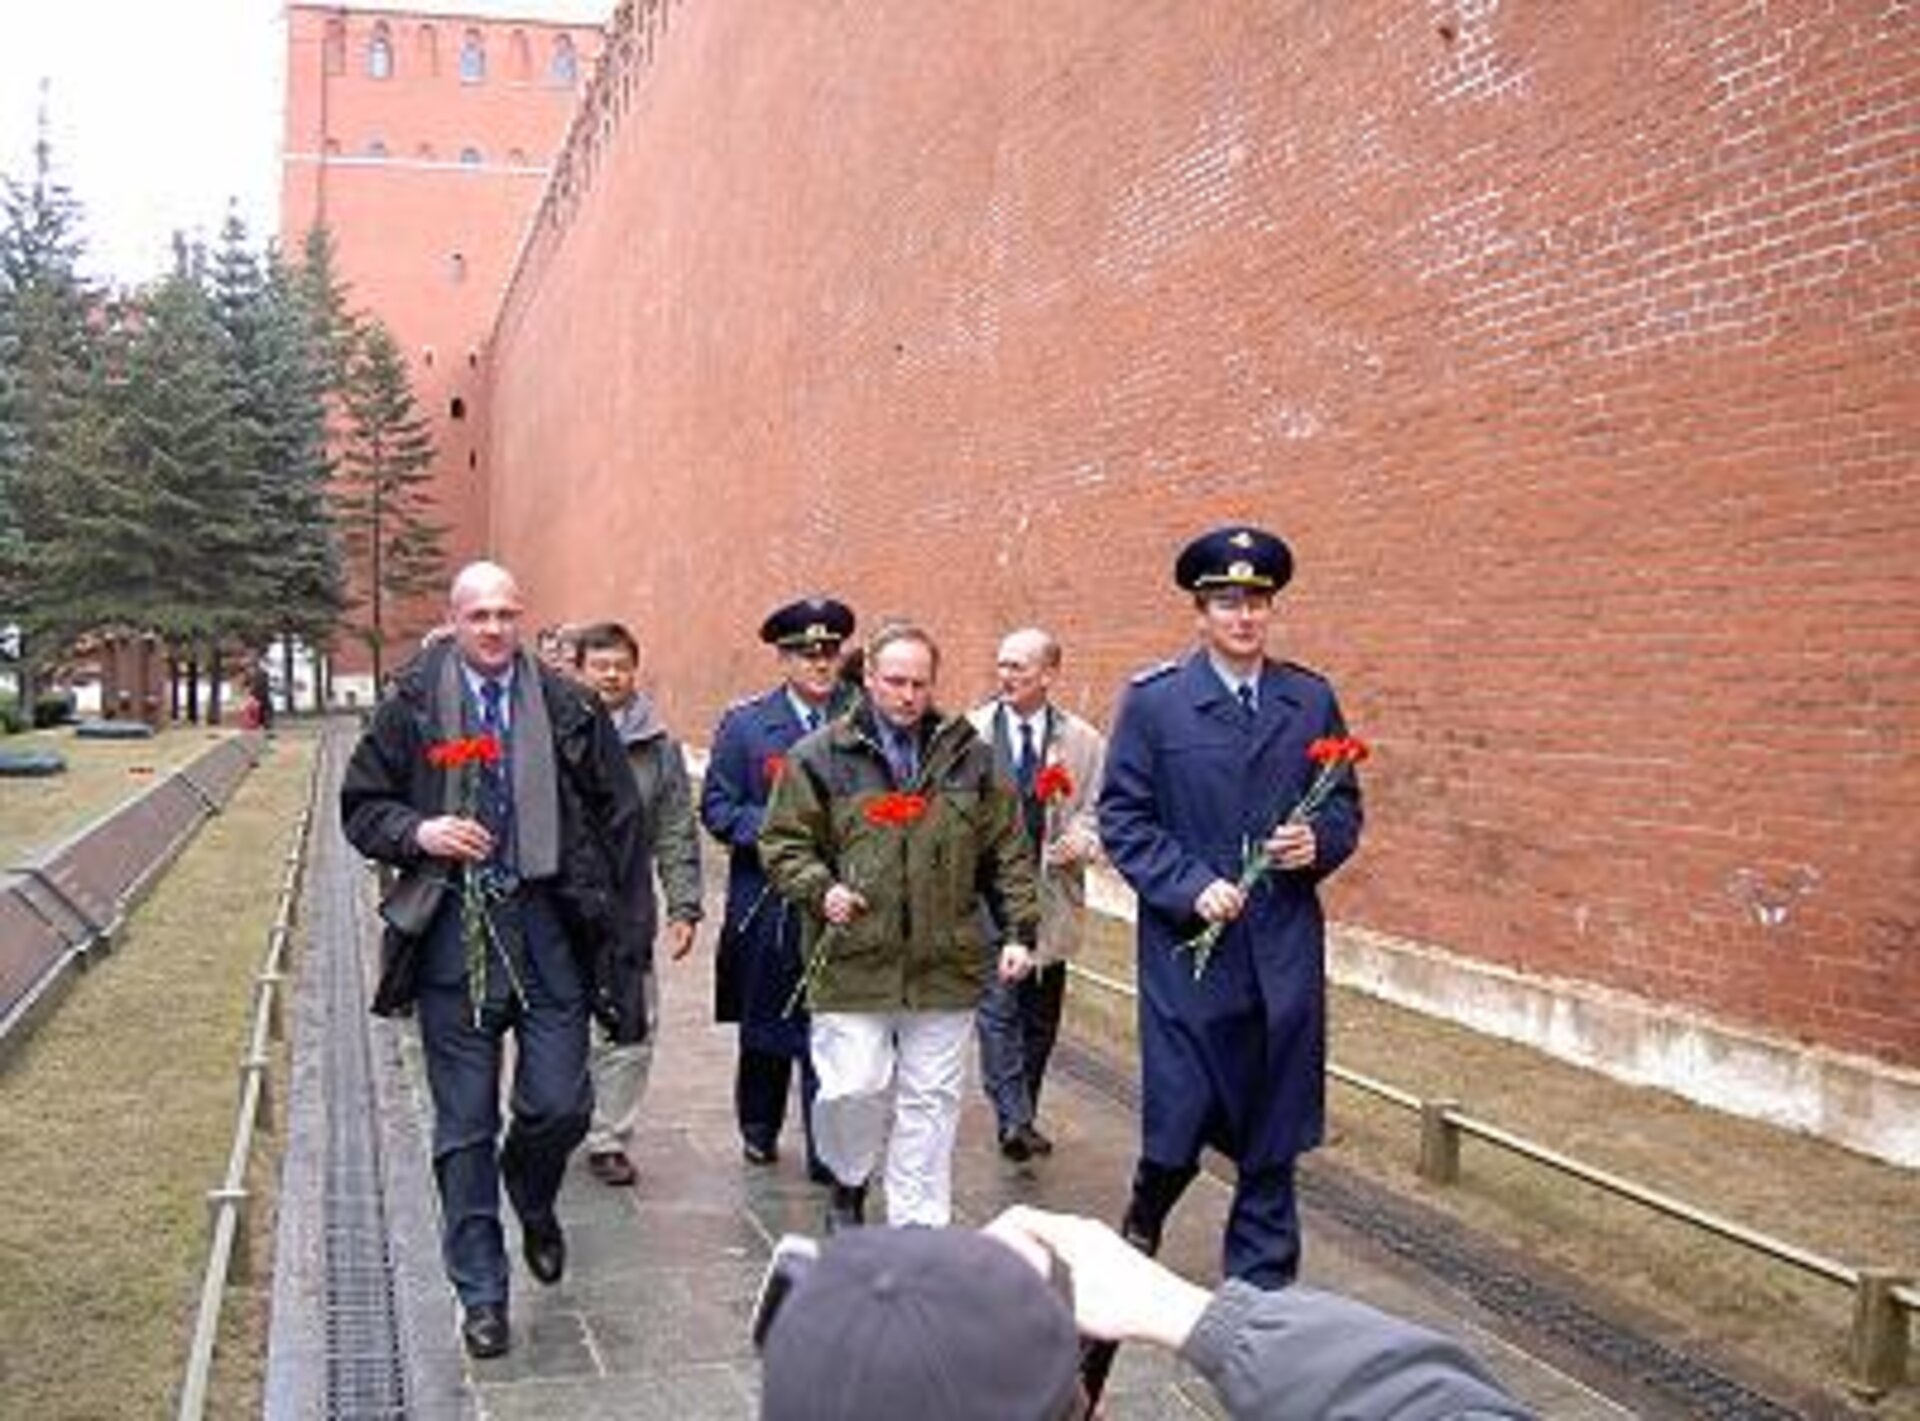 Laying flowers at the Kremlin Wall